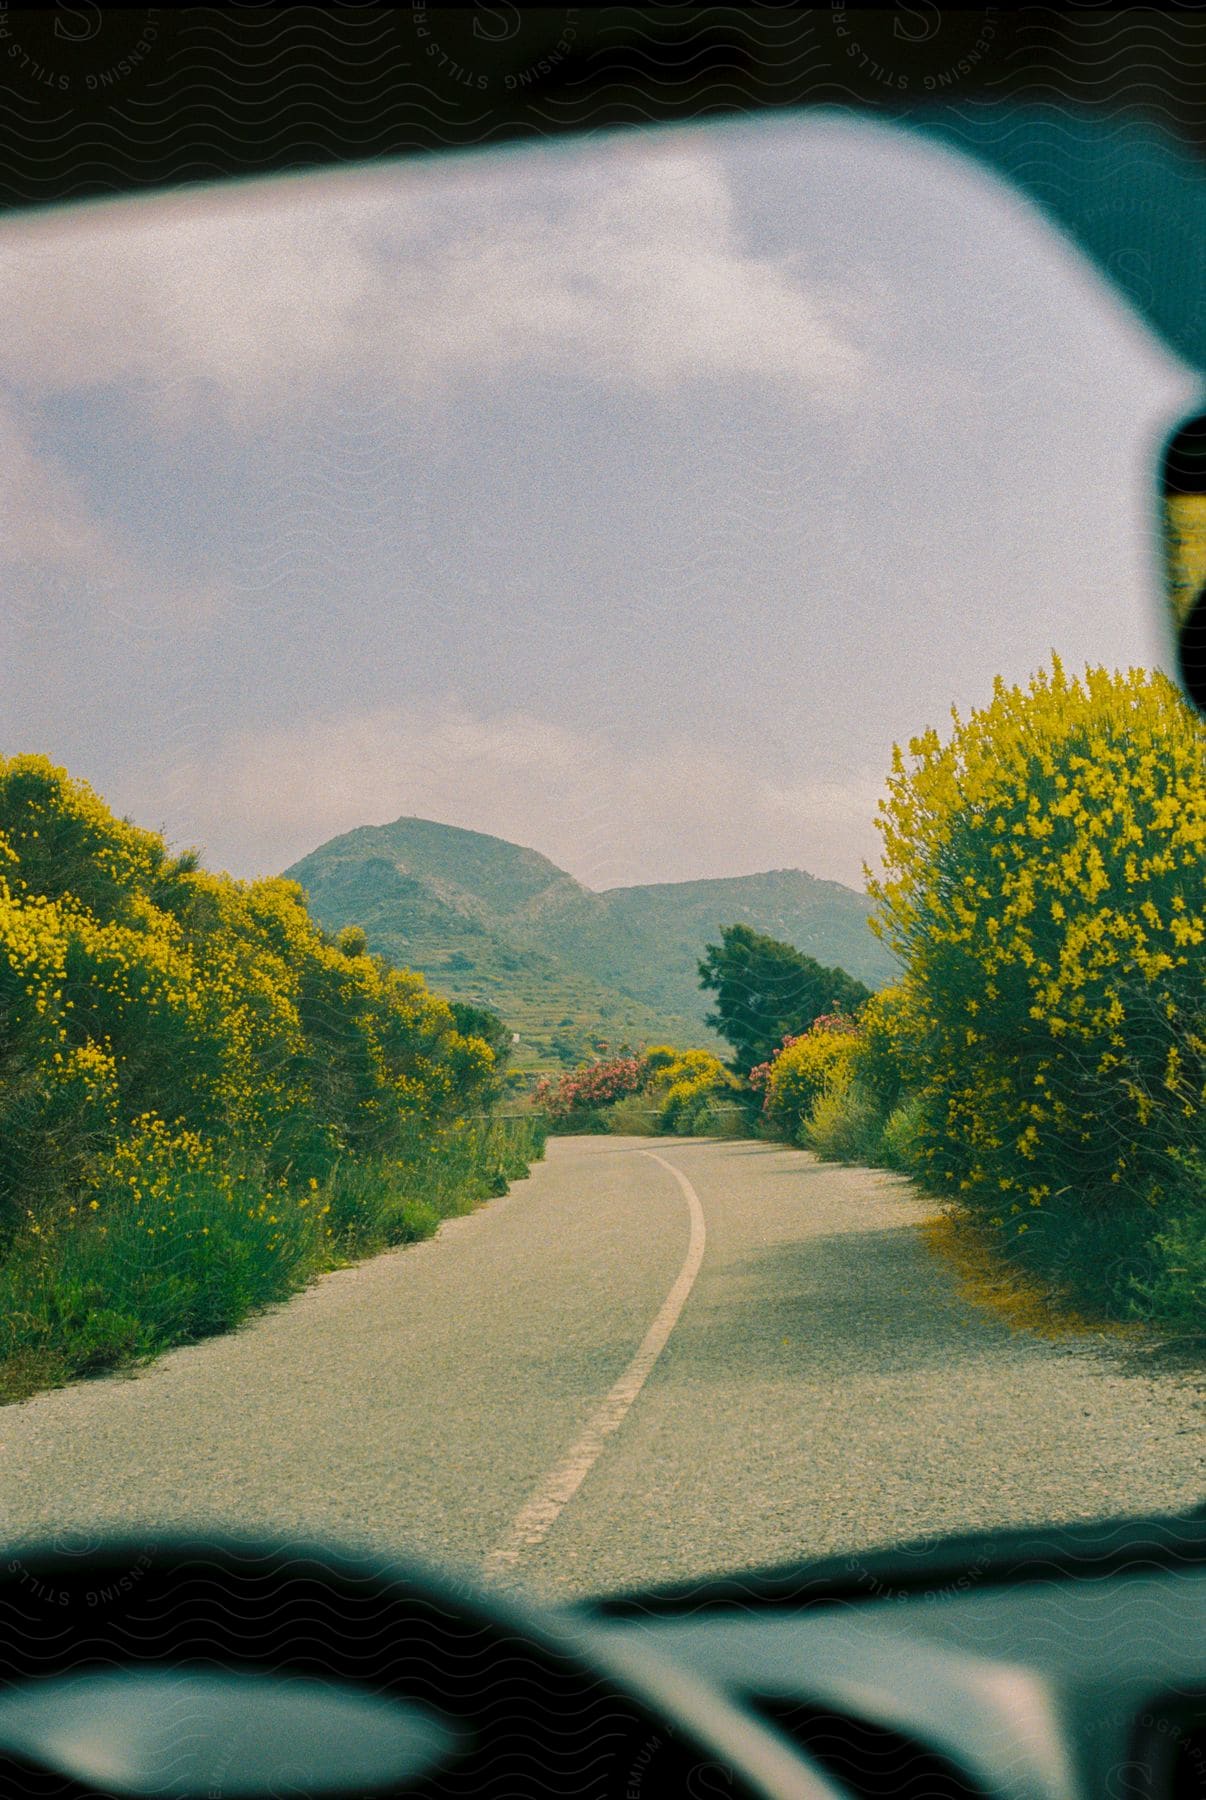 Bushes covered in yellow flowers line the sides of a narrow, paved road with mountains in the distance.